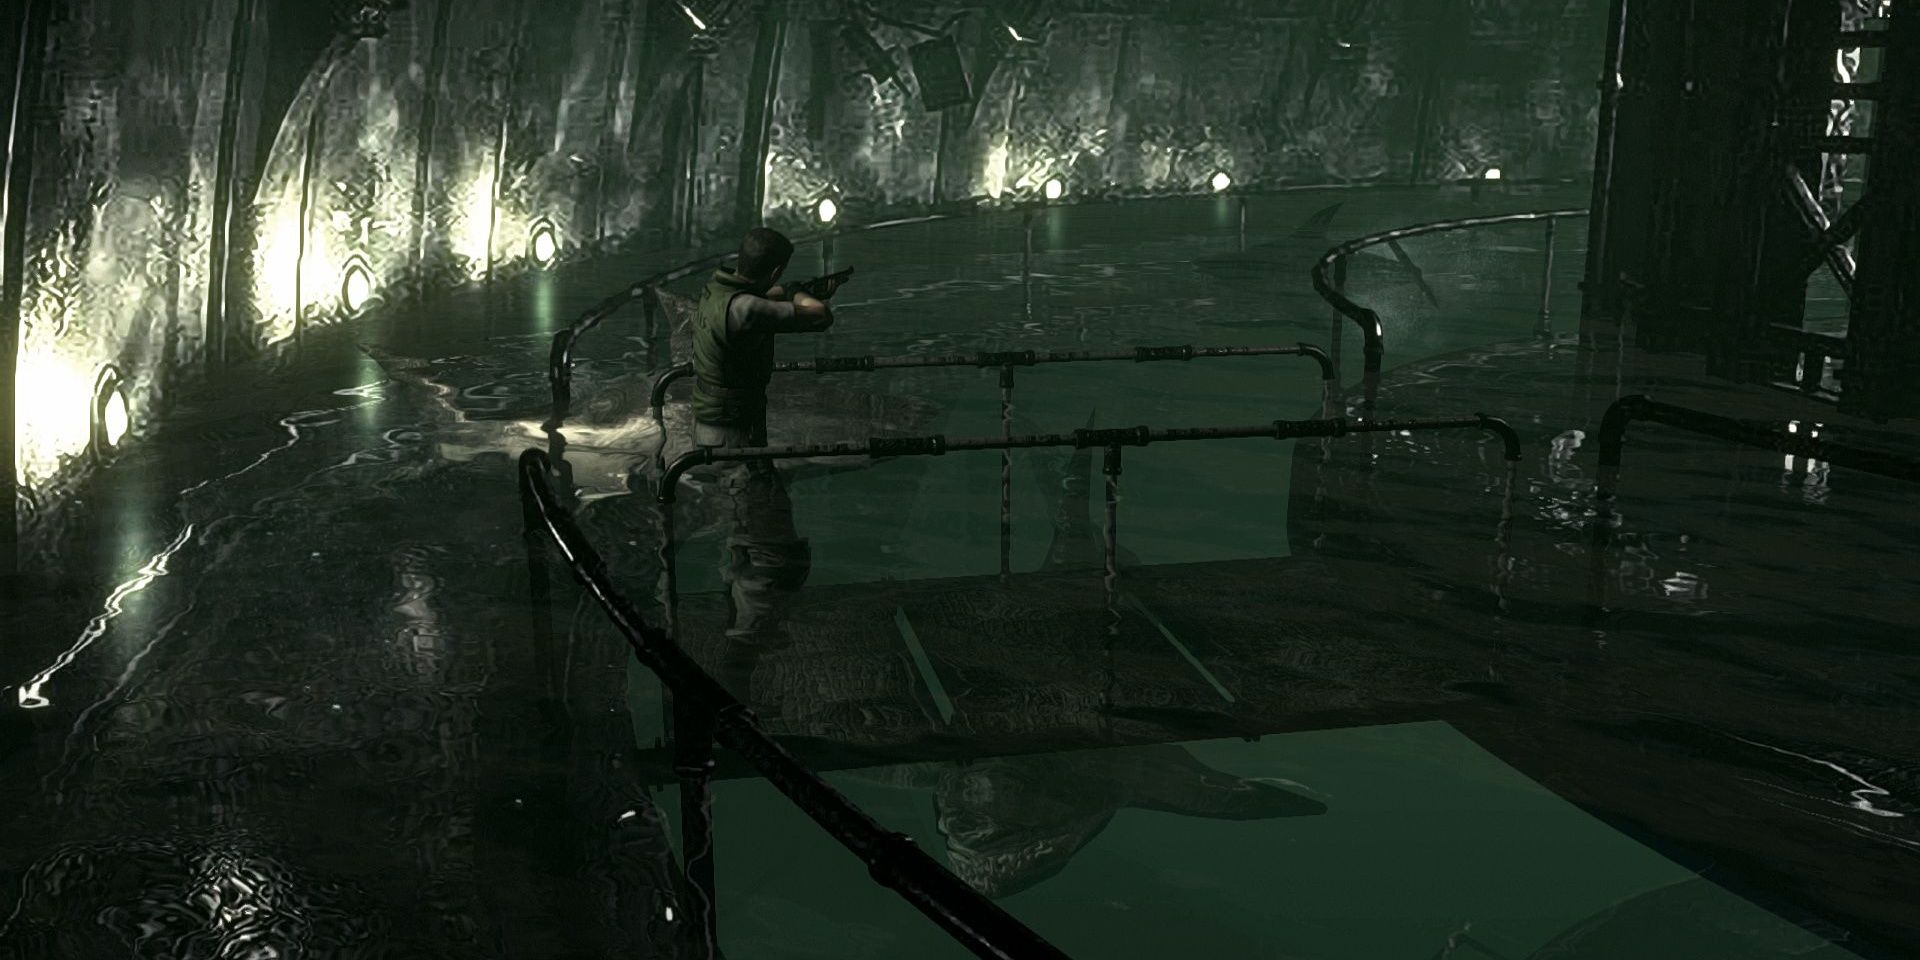 Shark attack sequence in Resident Evil